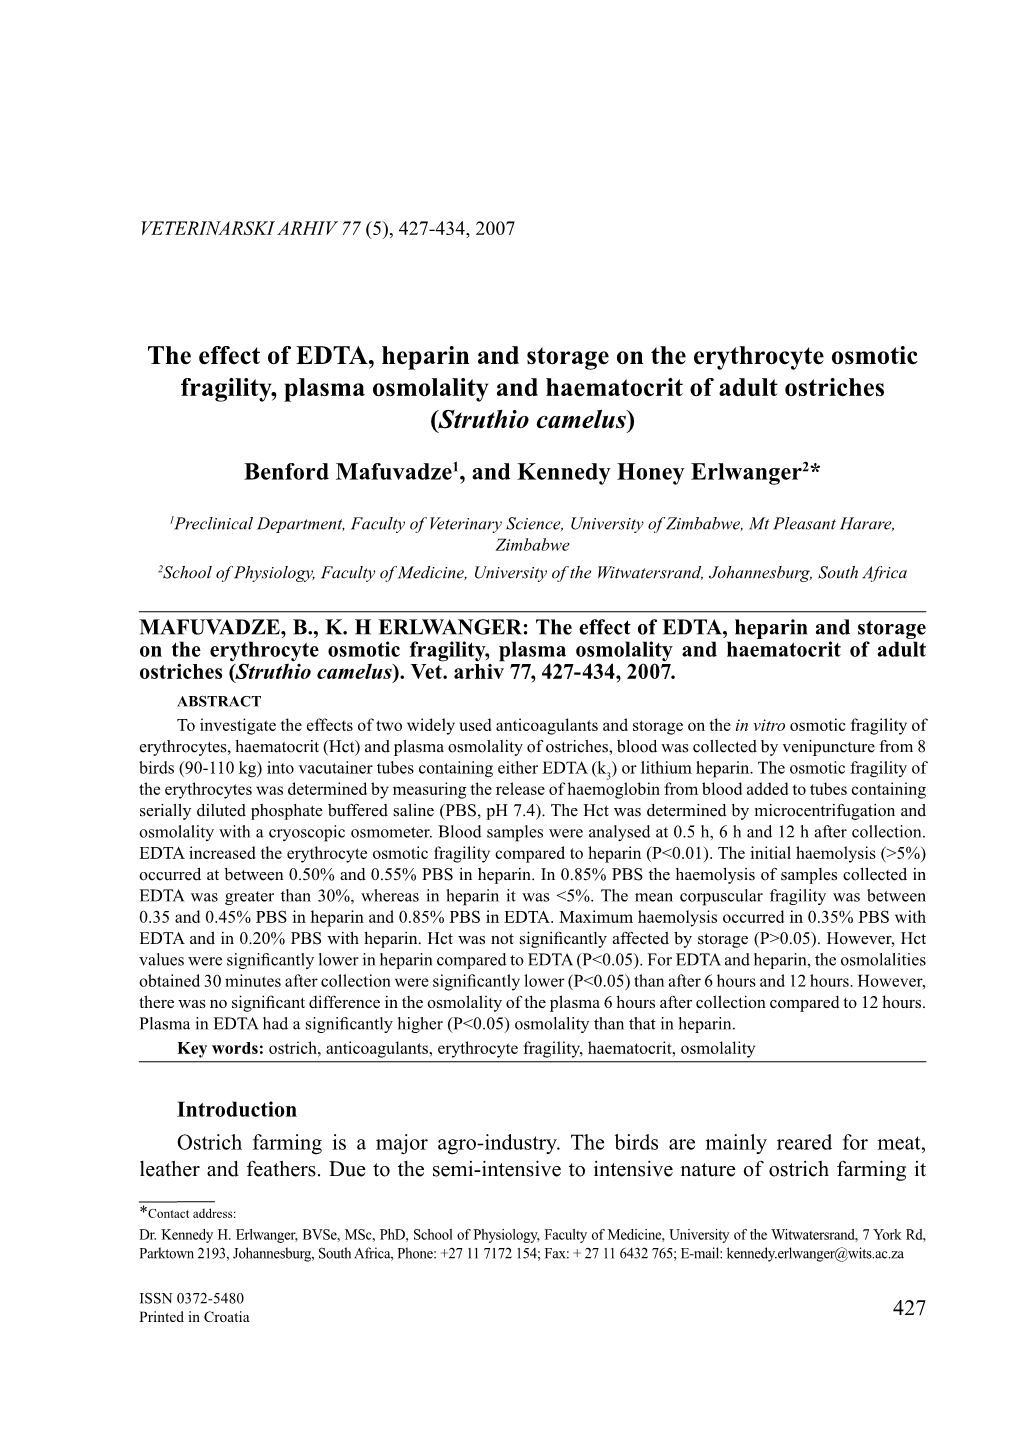 The Effect of EDTA, Heparin and Storage on the Erythrocyte Osmotic Fragility, Plasma Osmolality and Haematocrit of Adult Ostriches (Struthio Camelus)